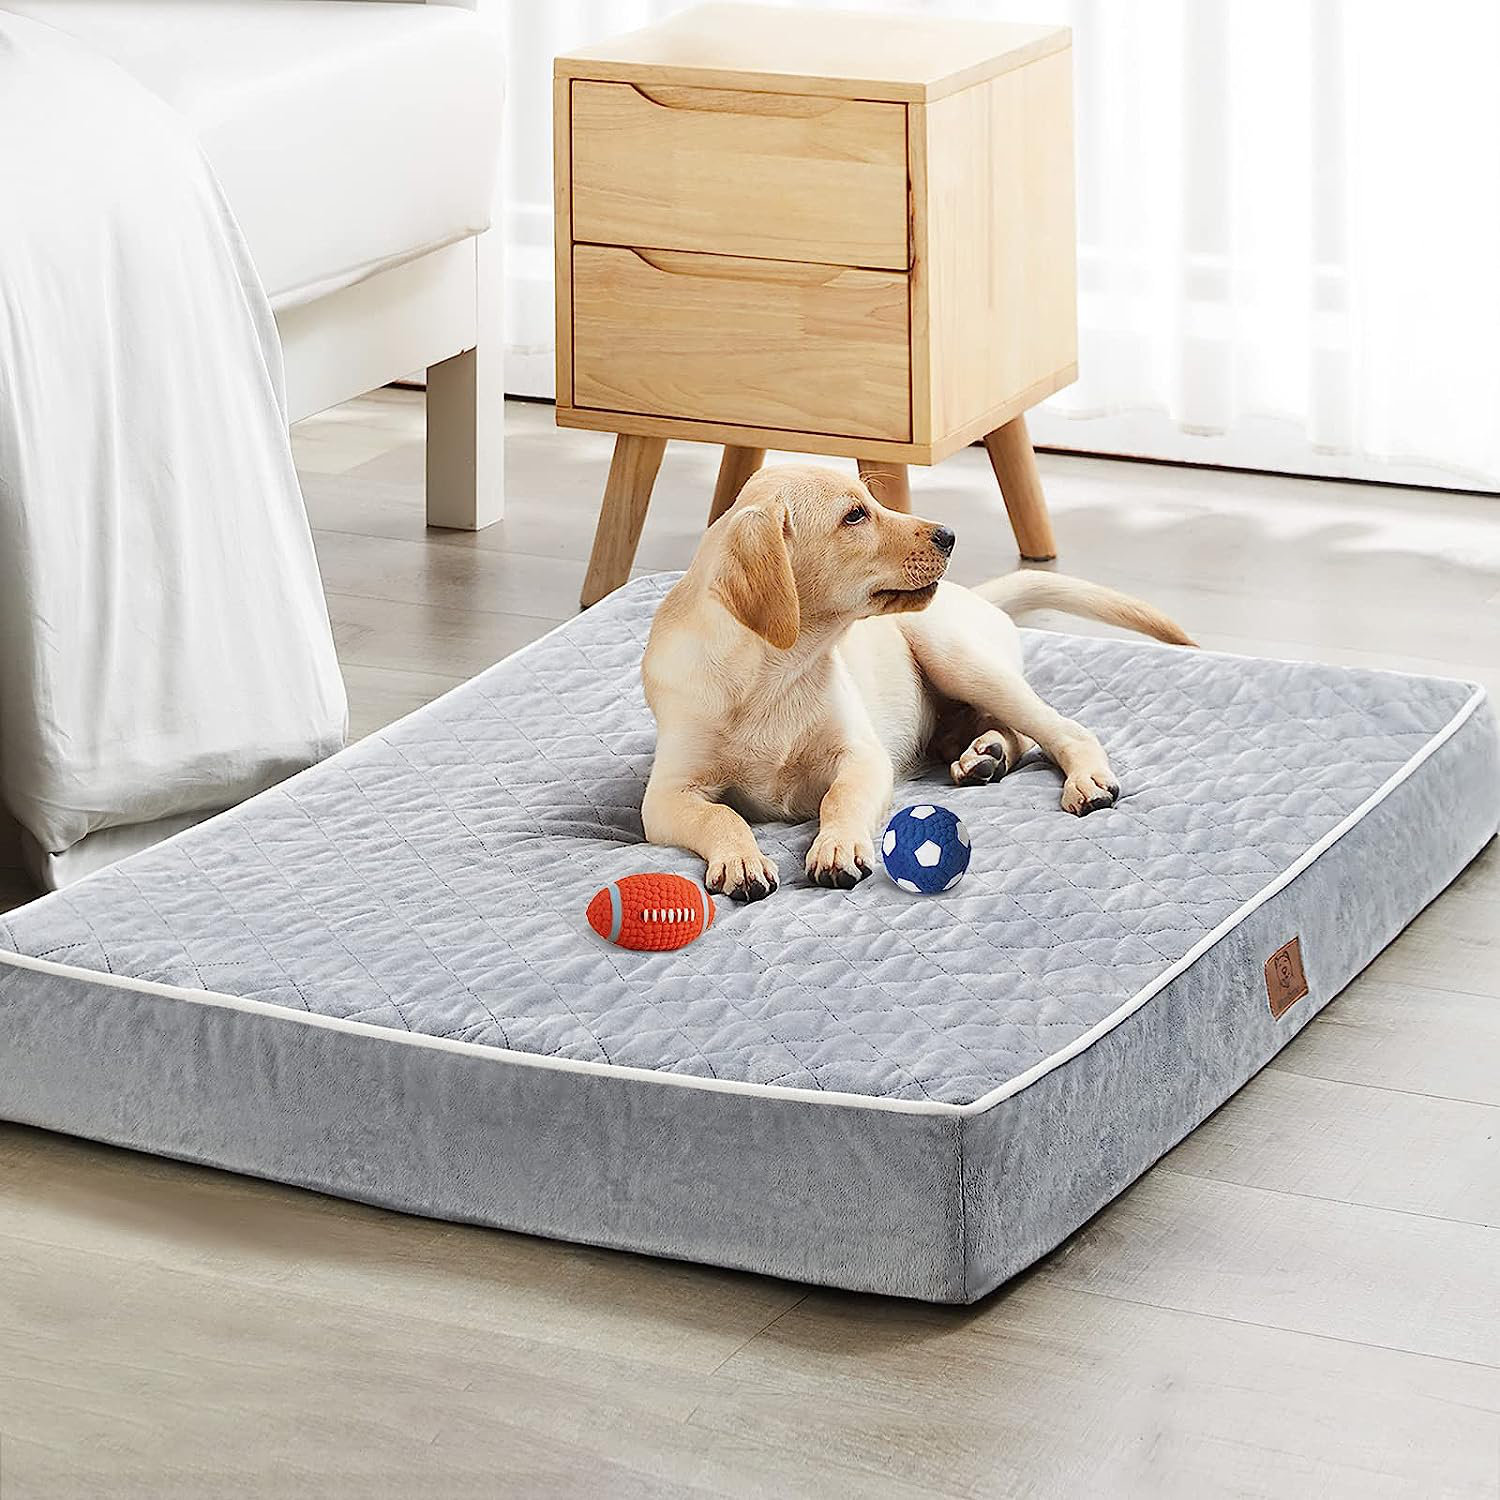 Bom Garoto Portable Pet Mat - 46.5 x 33 Inch Cat and Dog Mat for Crate Bed,  Dog Cage, Fireside or Camping! Waterproof Dog Beds for Medium Dogs and